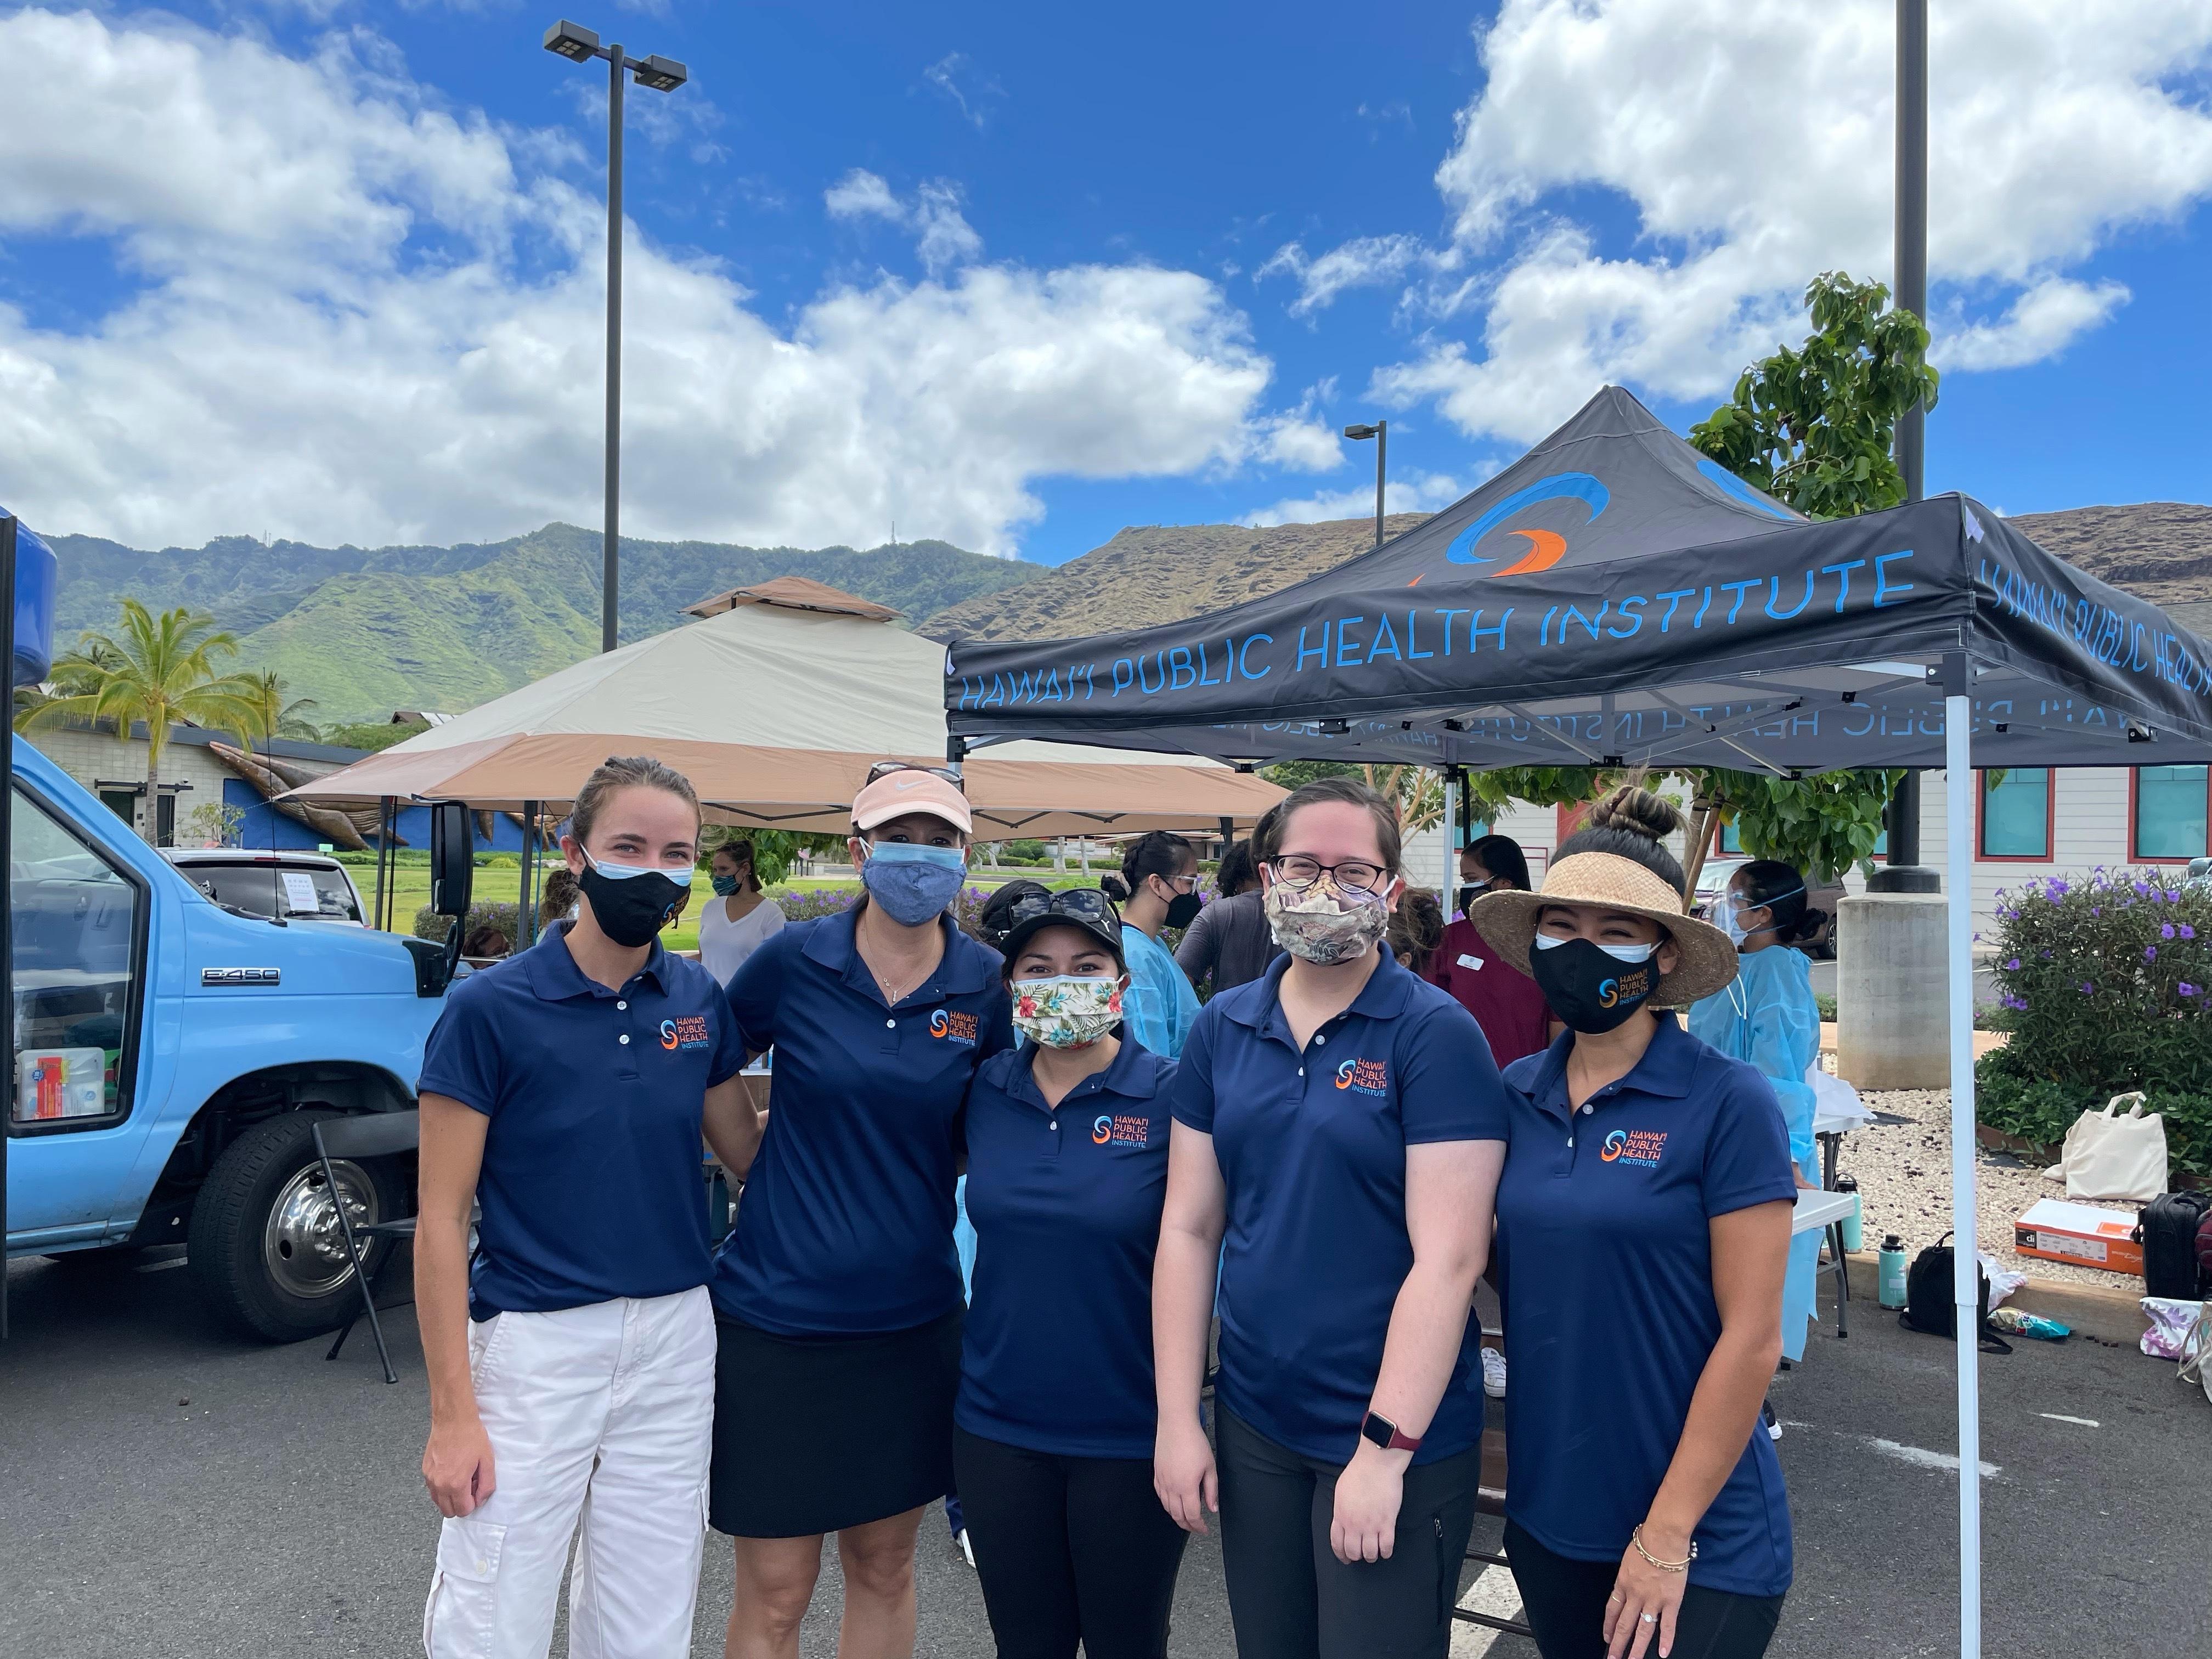 Five people wearing masks and matching navy blue shirts pose for a group picture